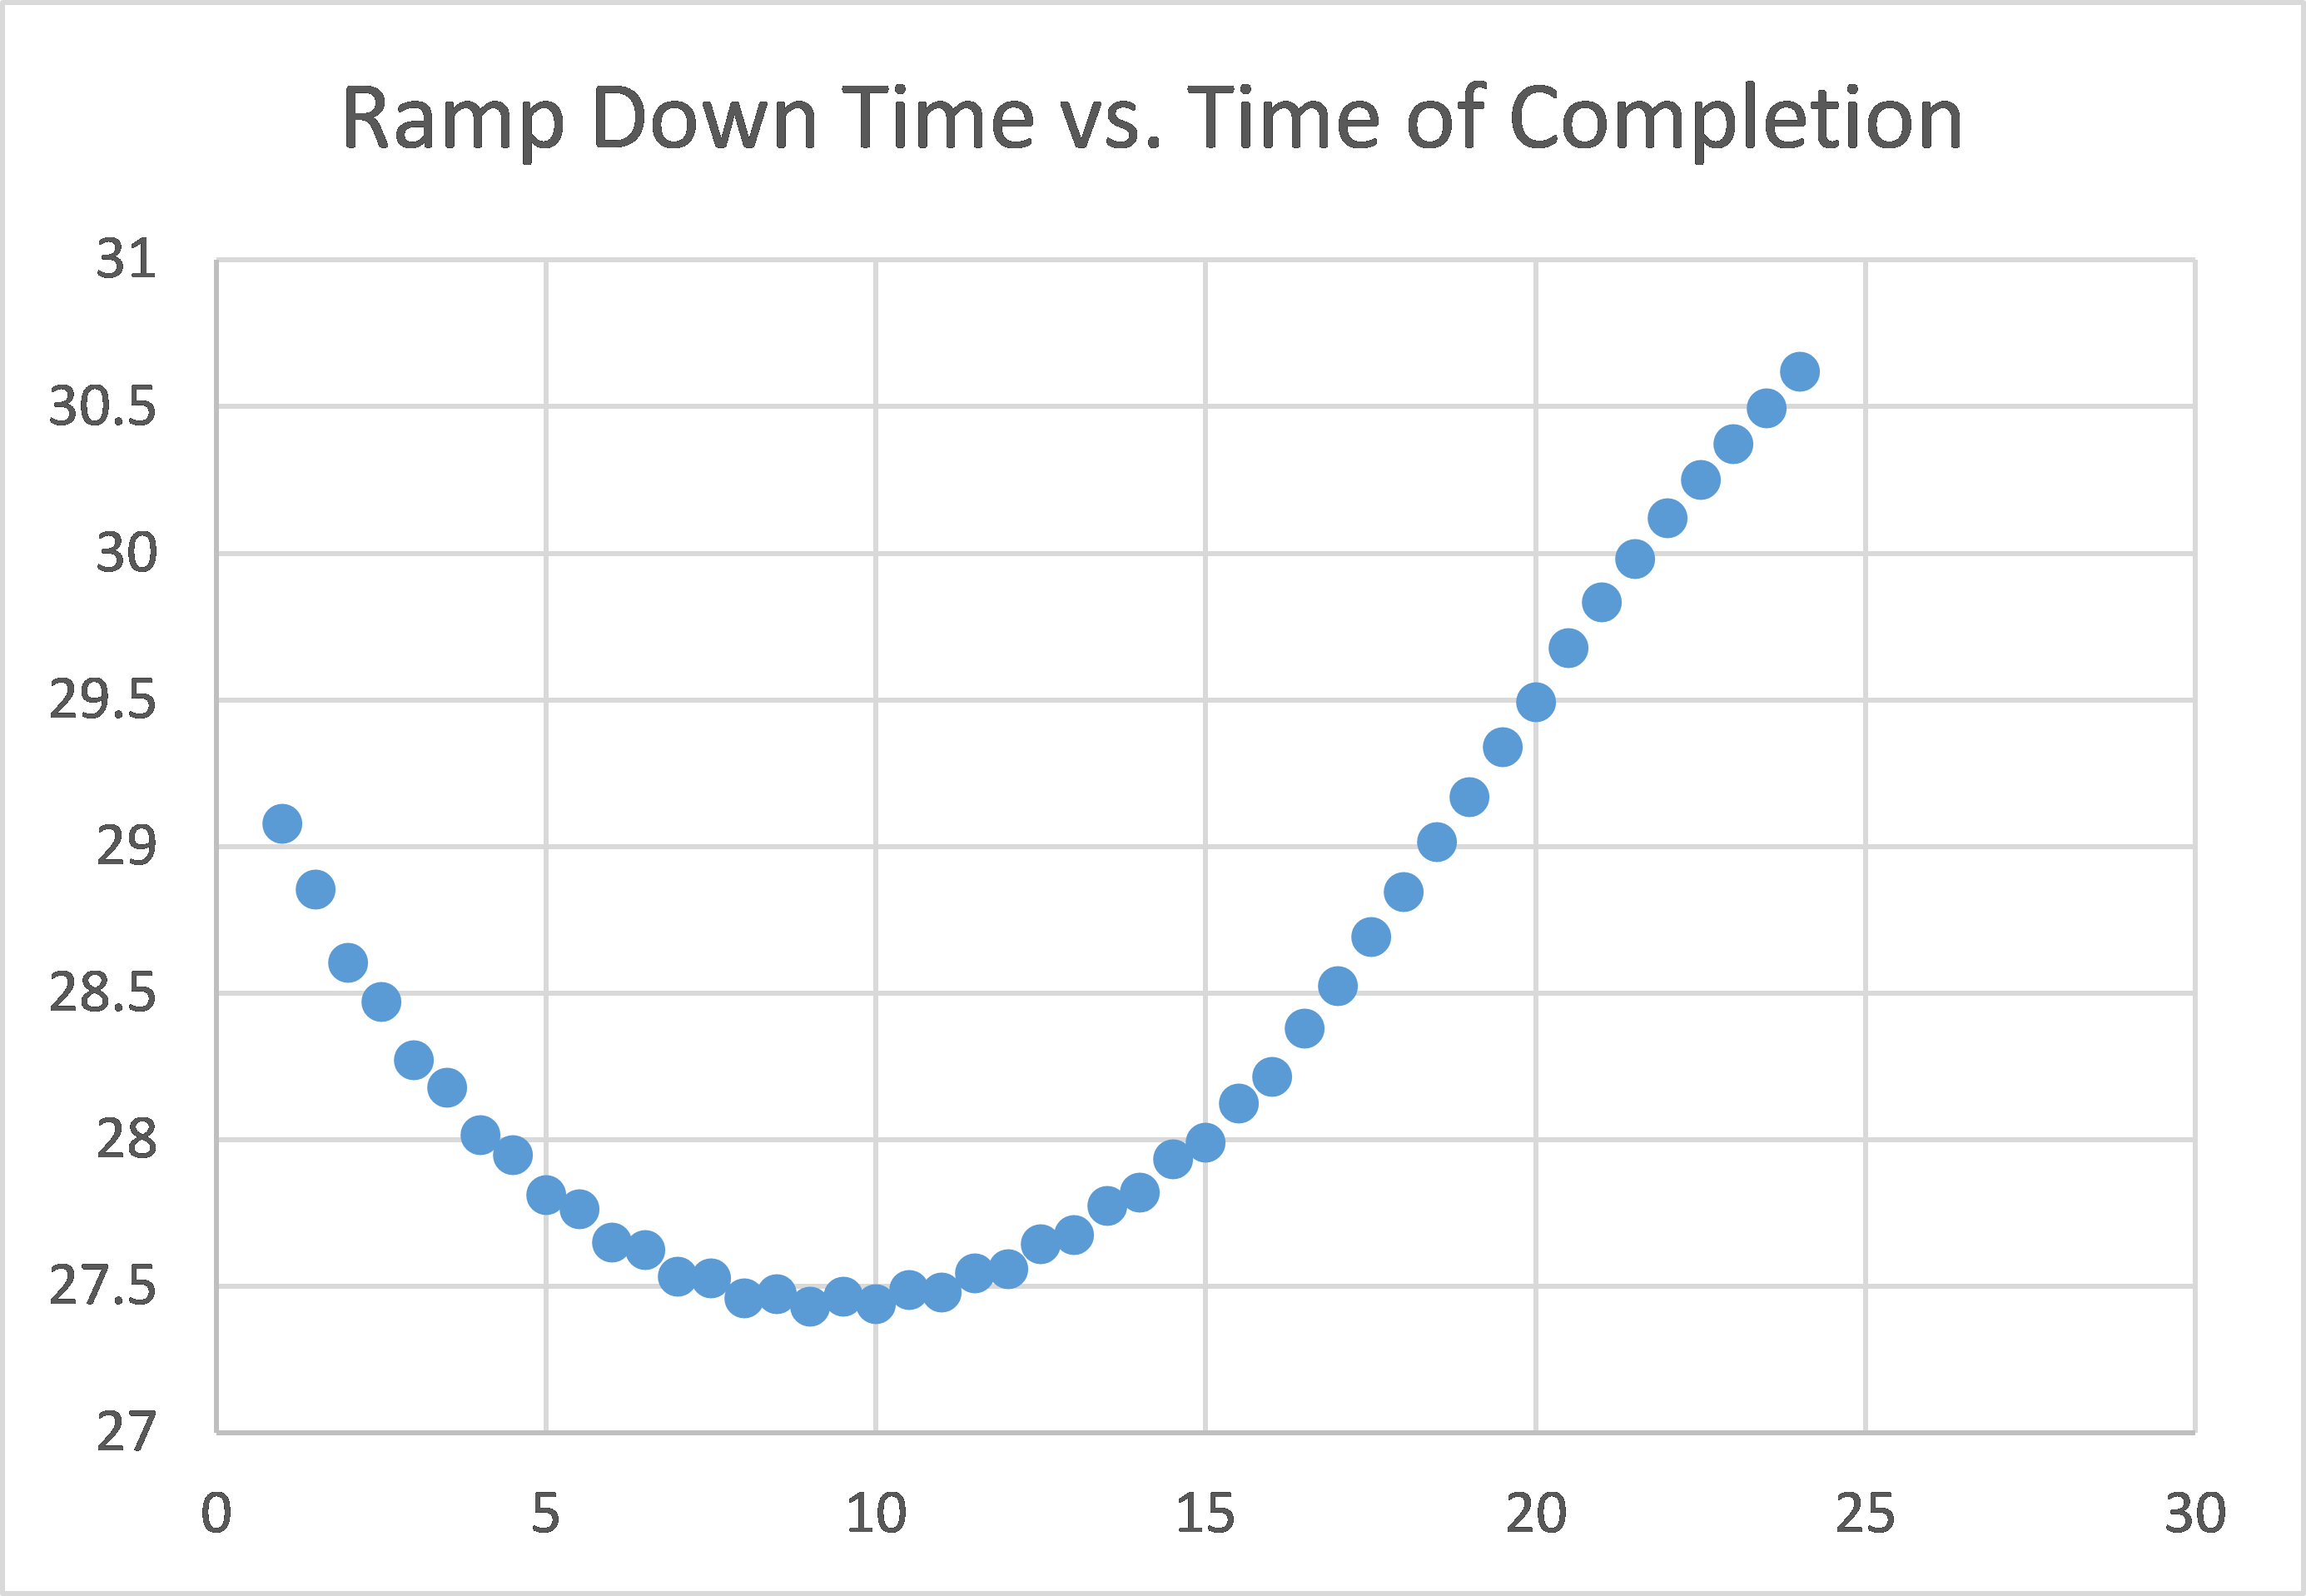 Graph showing the ramp down simulation results.